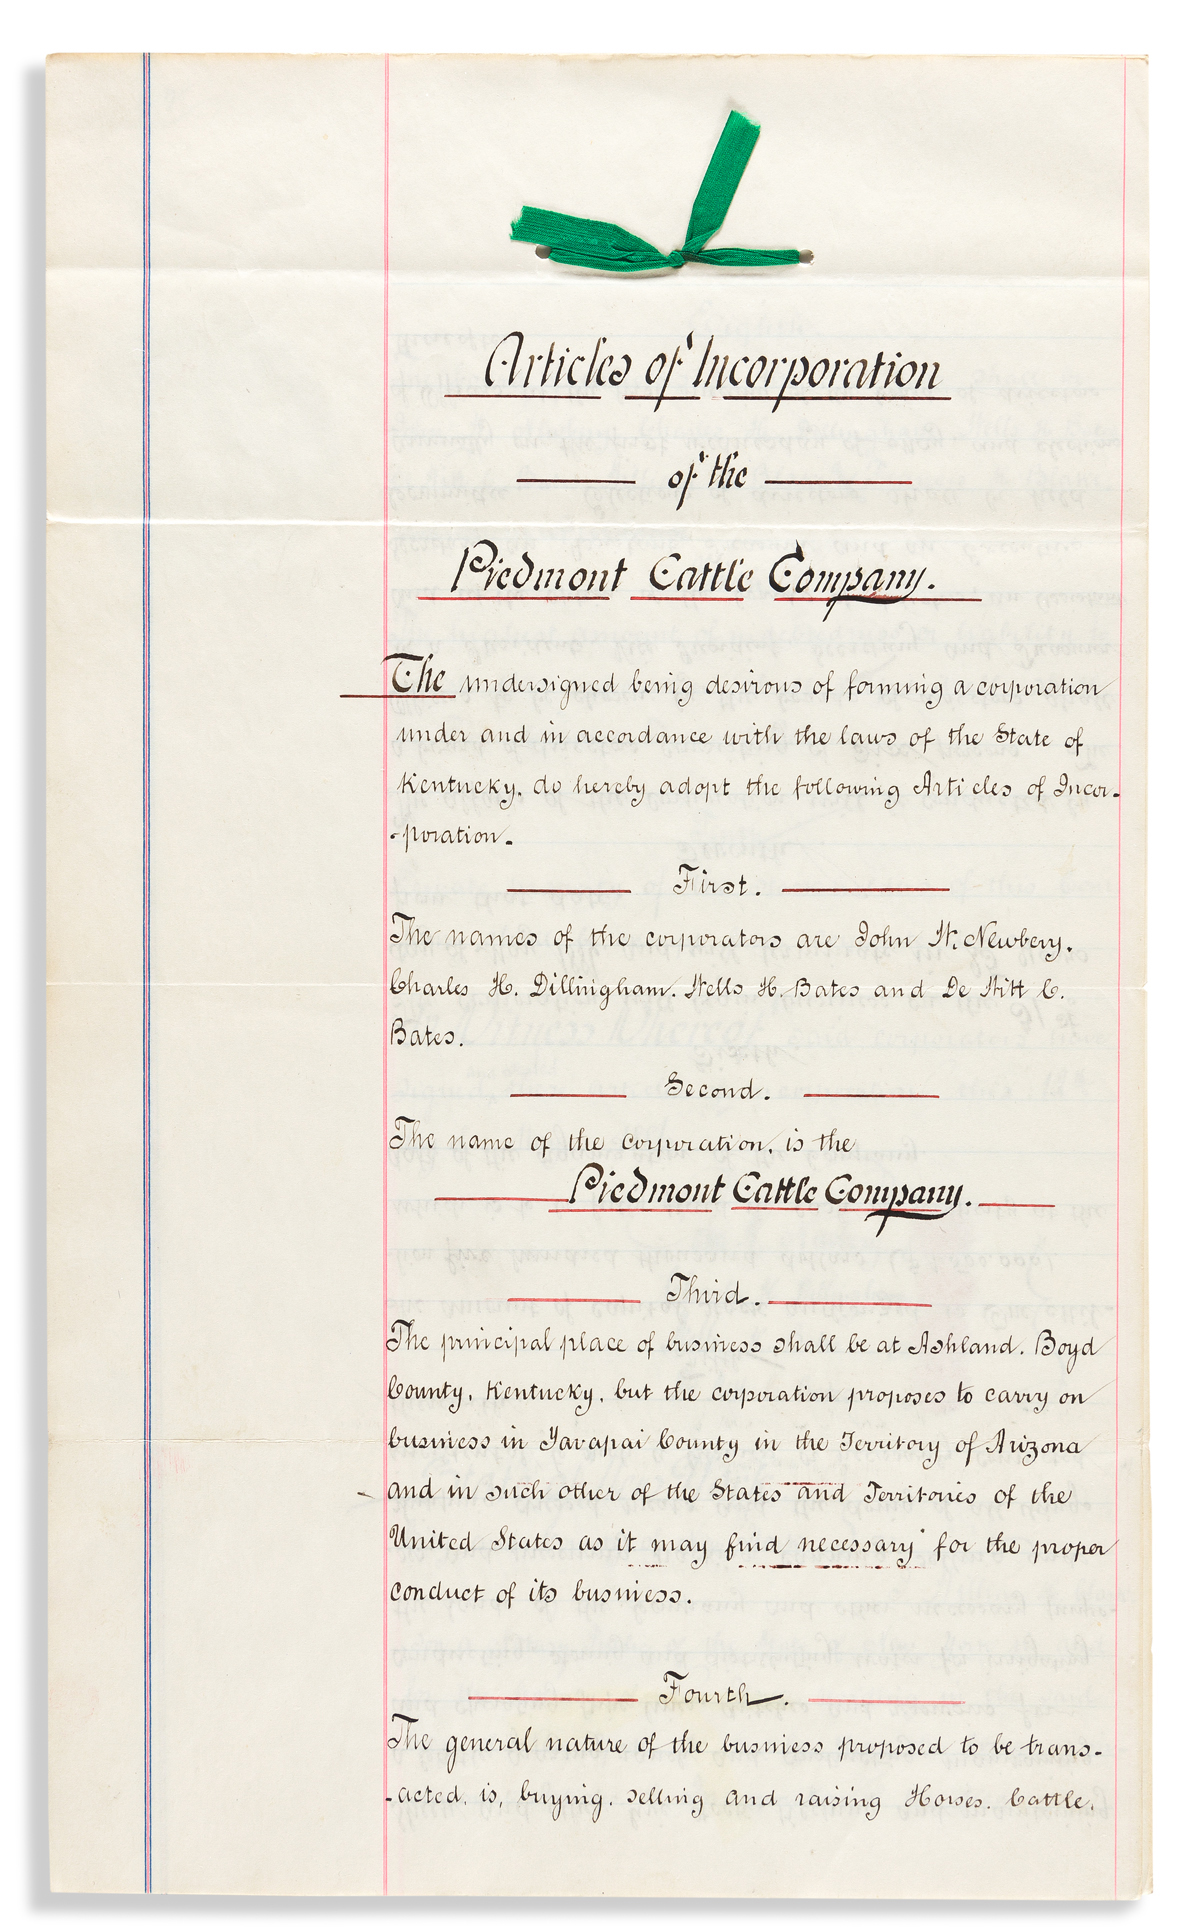 (WEST--ARIZONA.) Articles of Incorporation of the Piedmont Cattle Company.